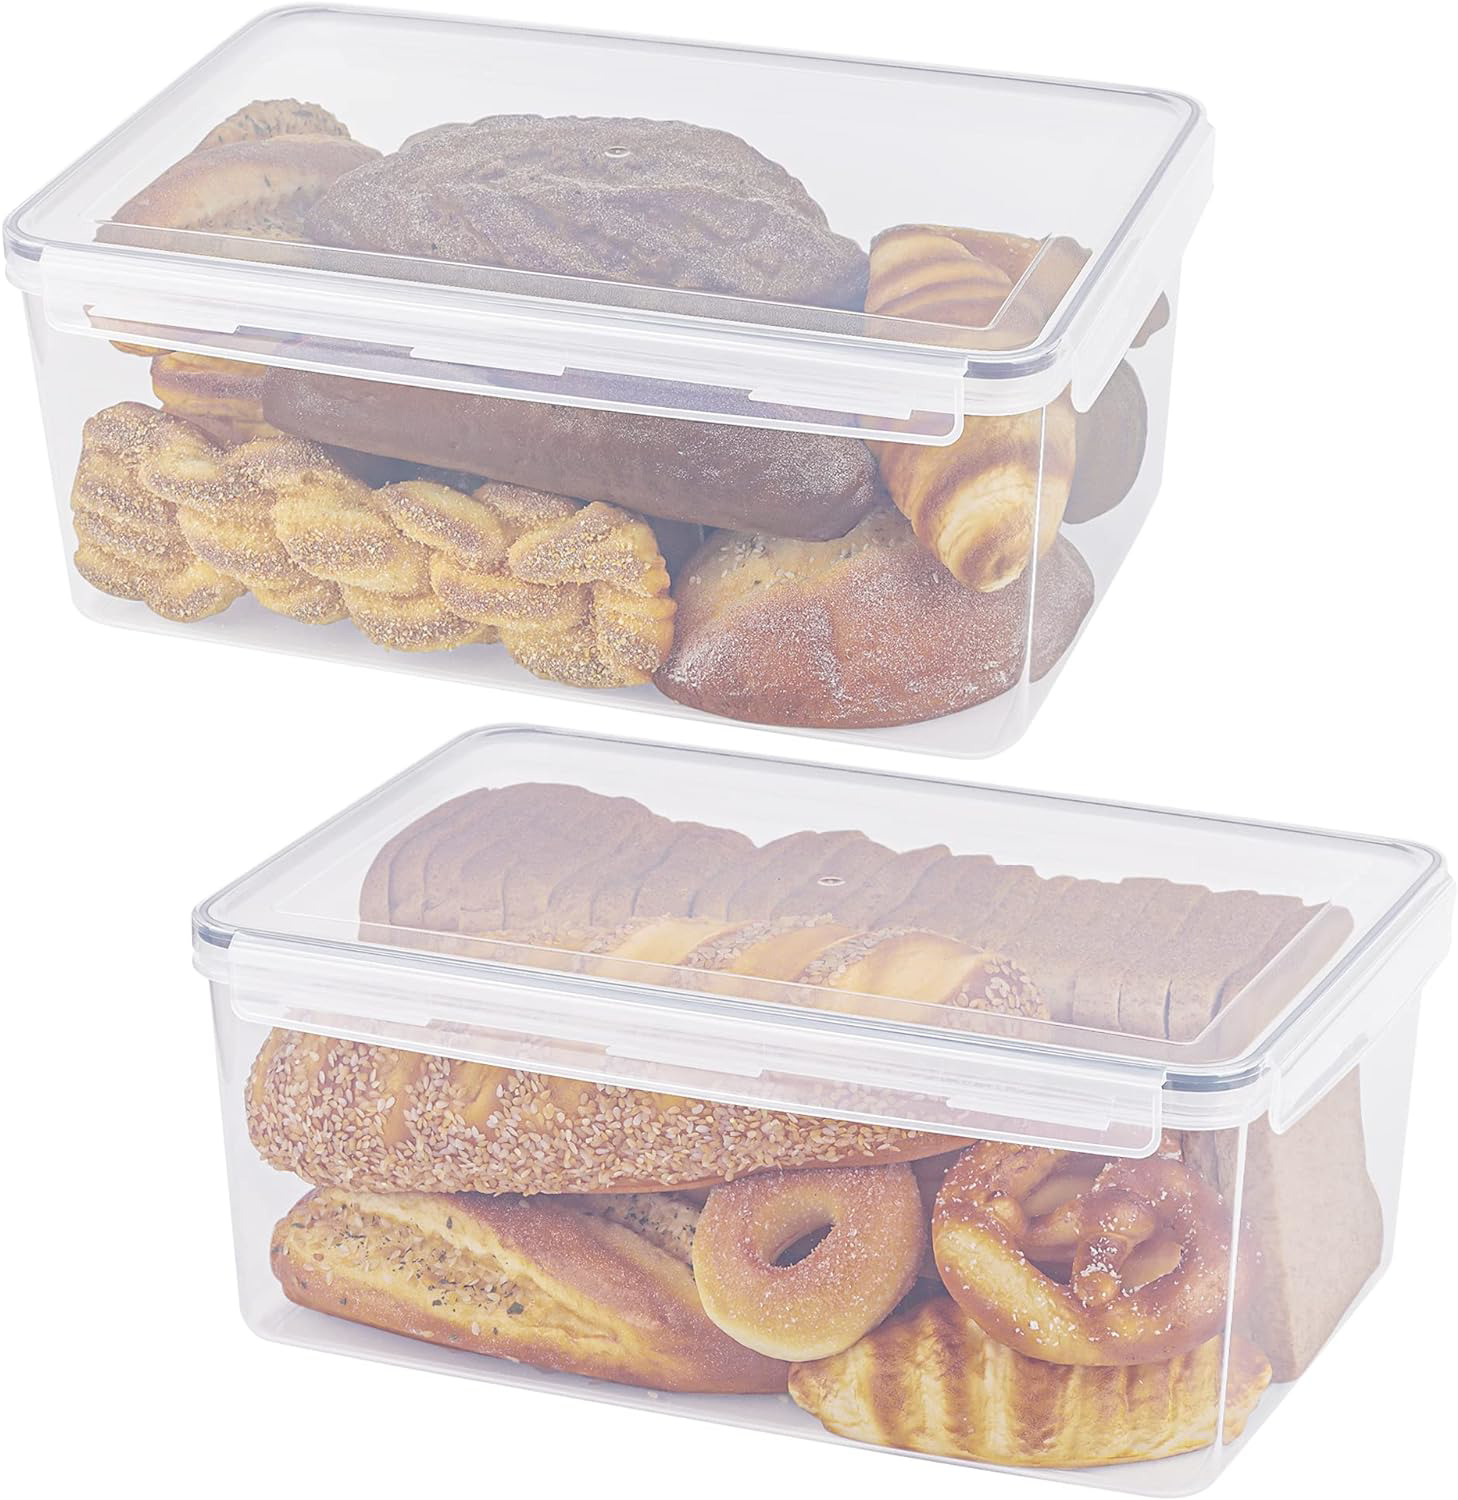 Tiawudi 2 Pack Large Bread Box for Kitchen Countertop Airtight Bread Stor